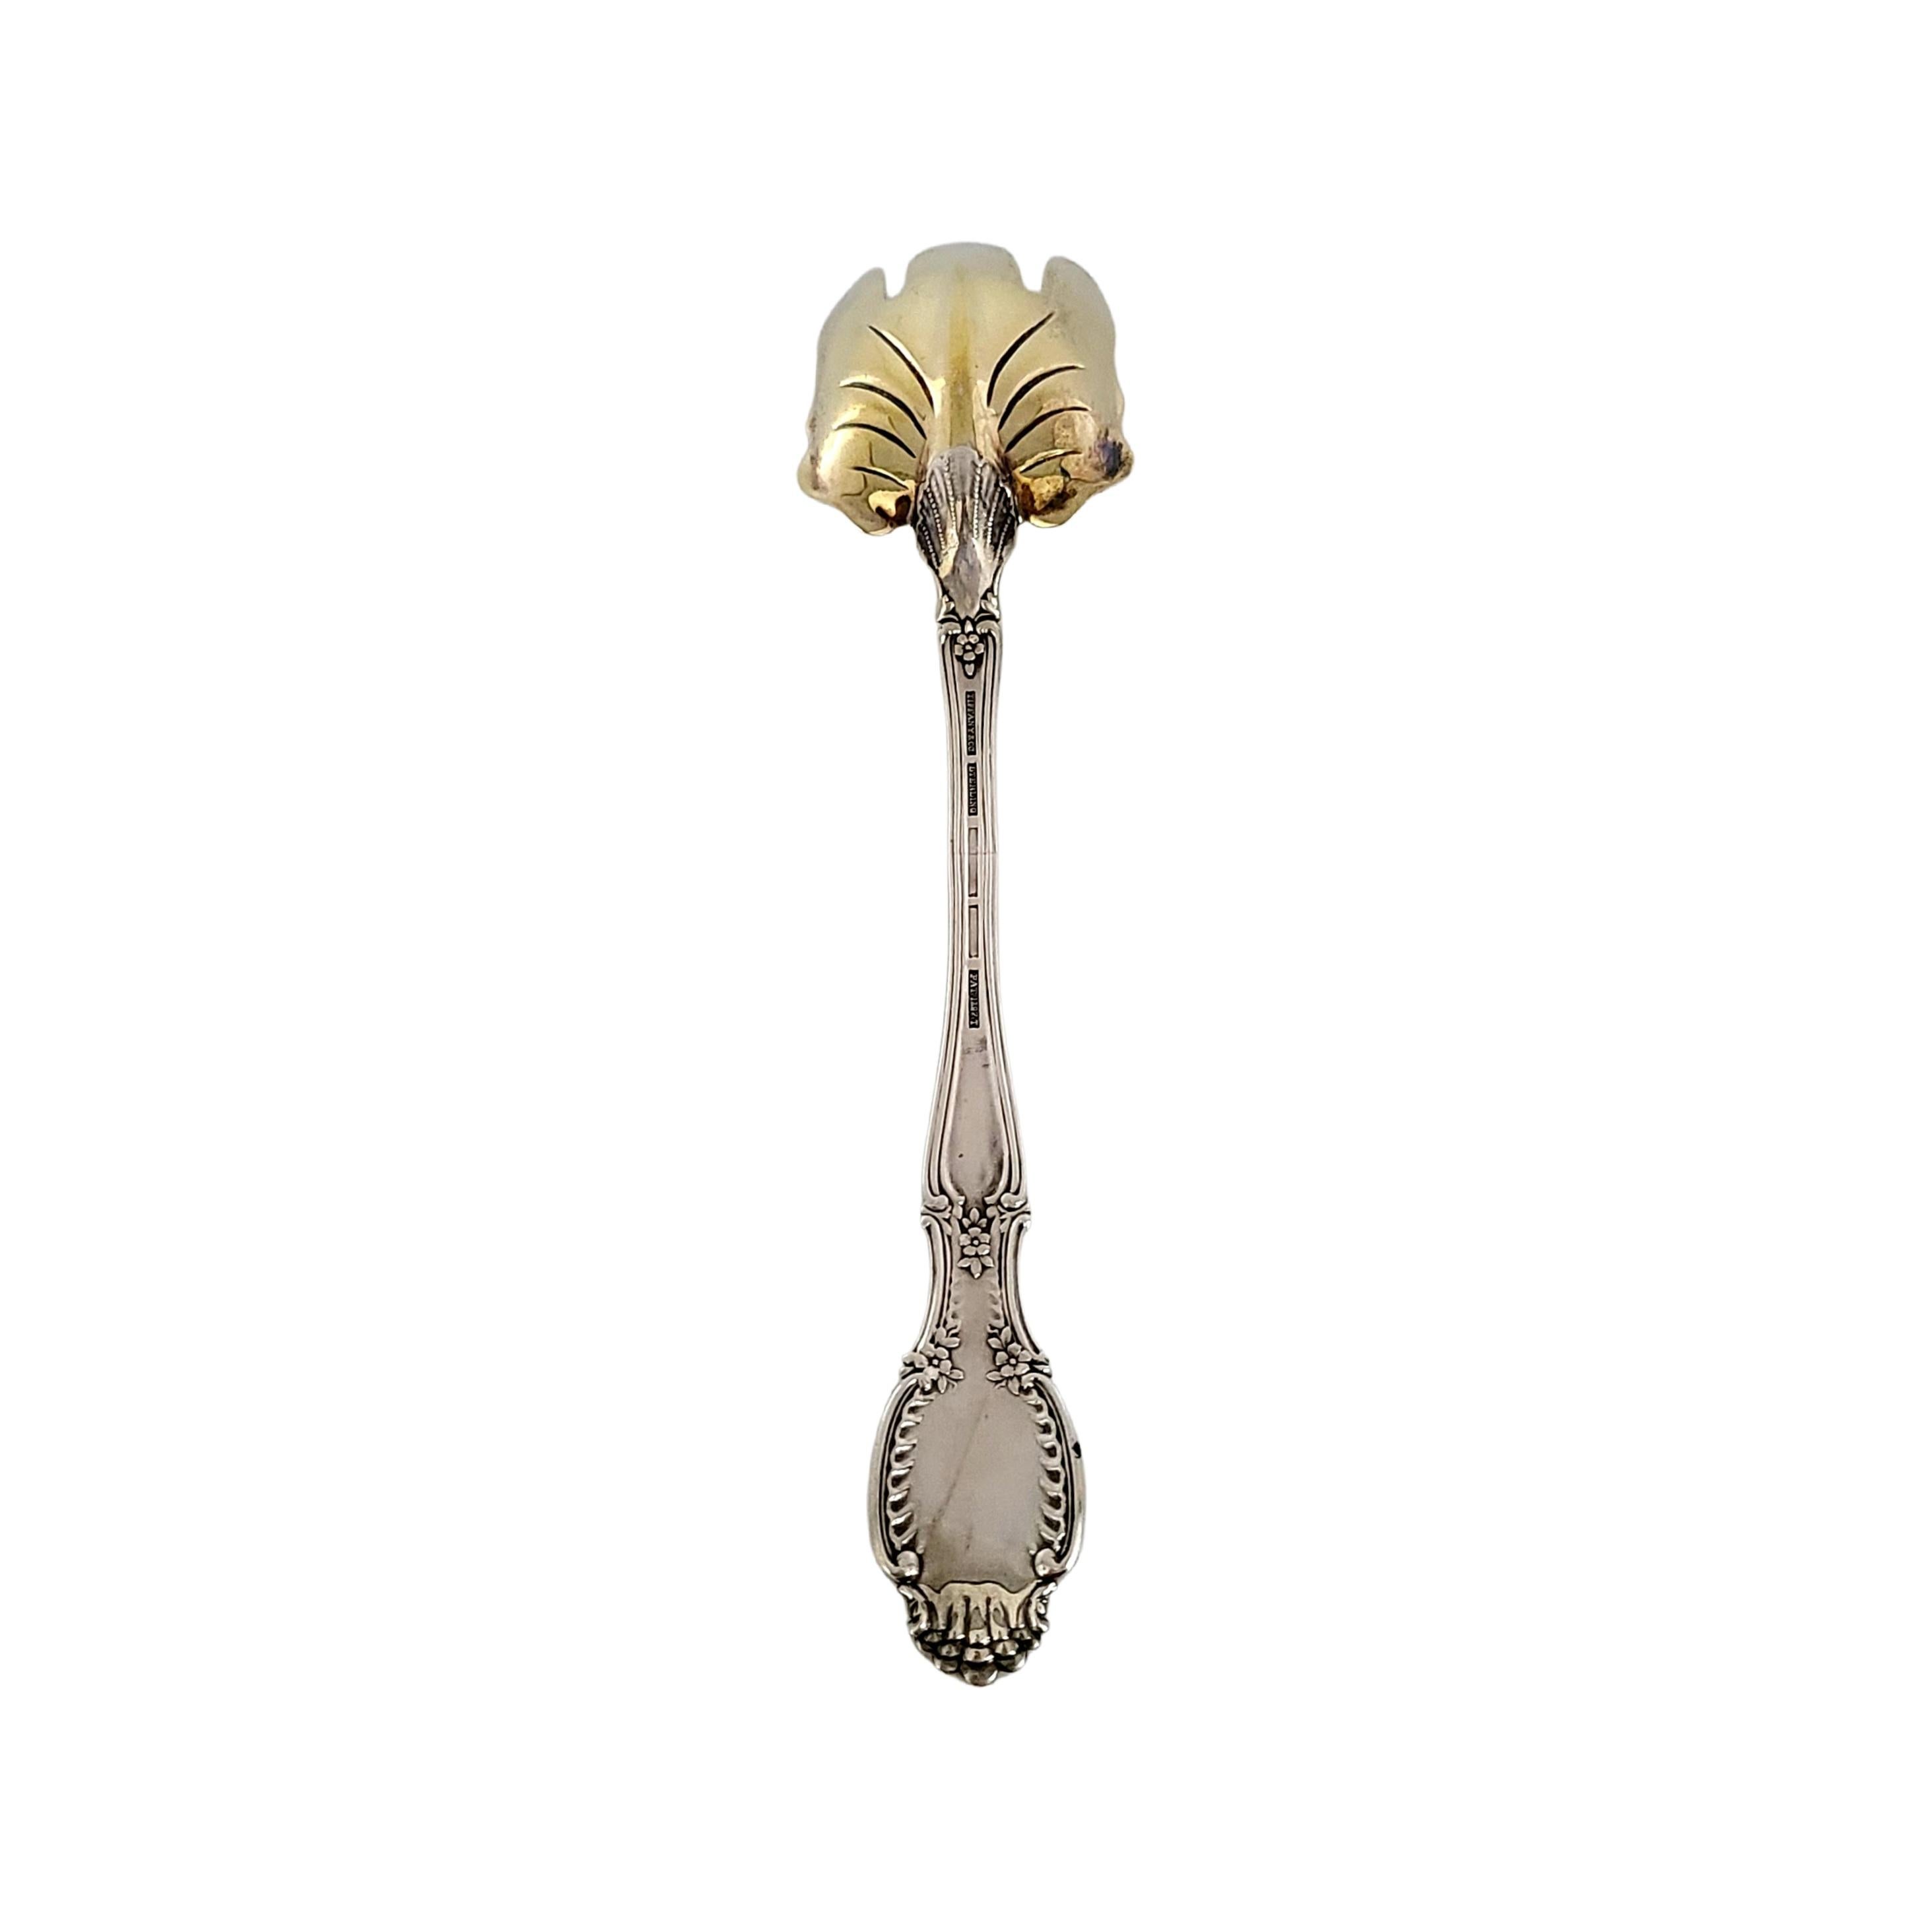 Antique Tiffany & Co sterling silver with gold wash bowl salad serving fork in the Richelieu pattern.

The Richelieu pattern was designed in 1892 by Paulding Farnham, Tiffany's chief designer of the time. This piece features a 3 tined gold washed